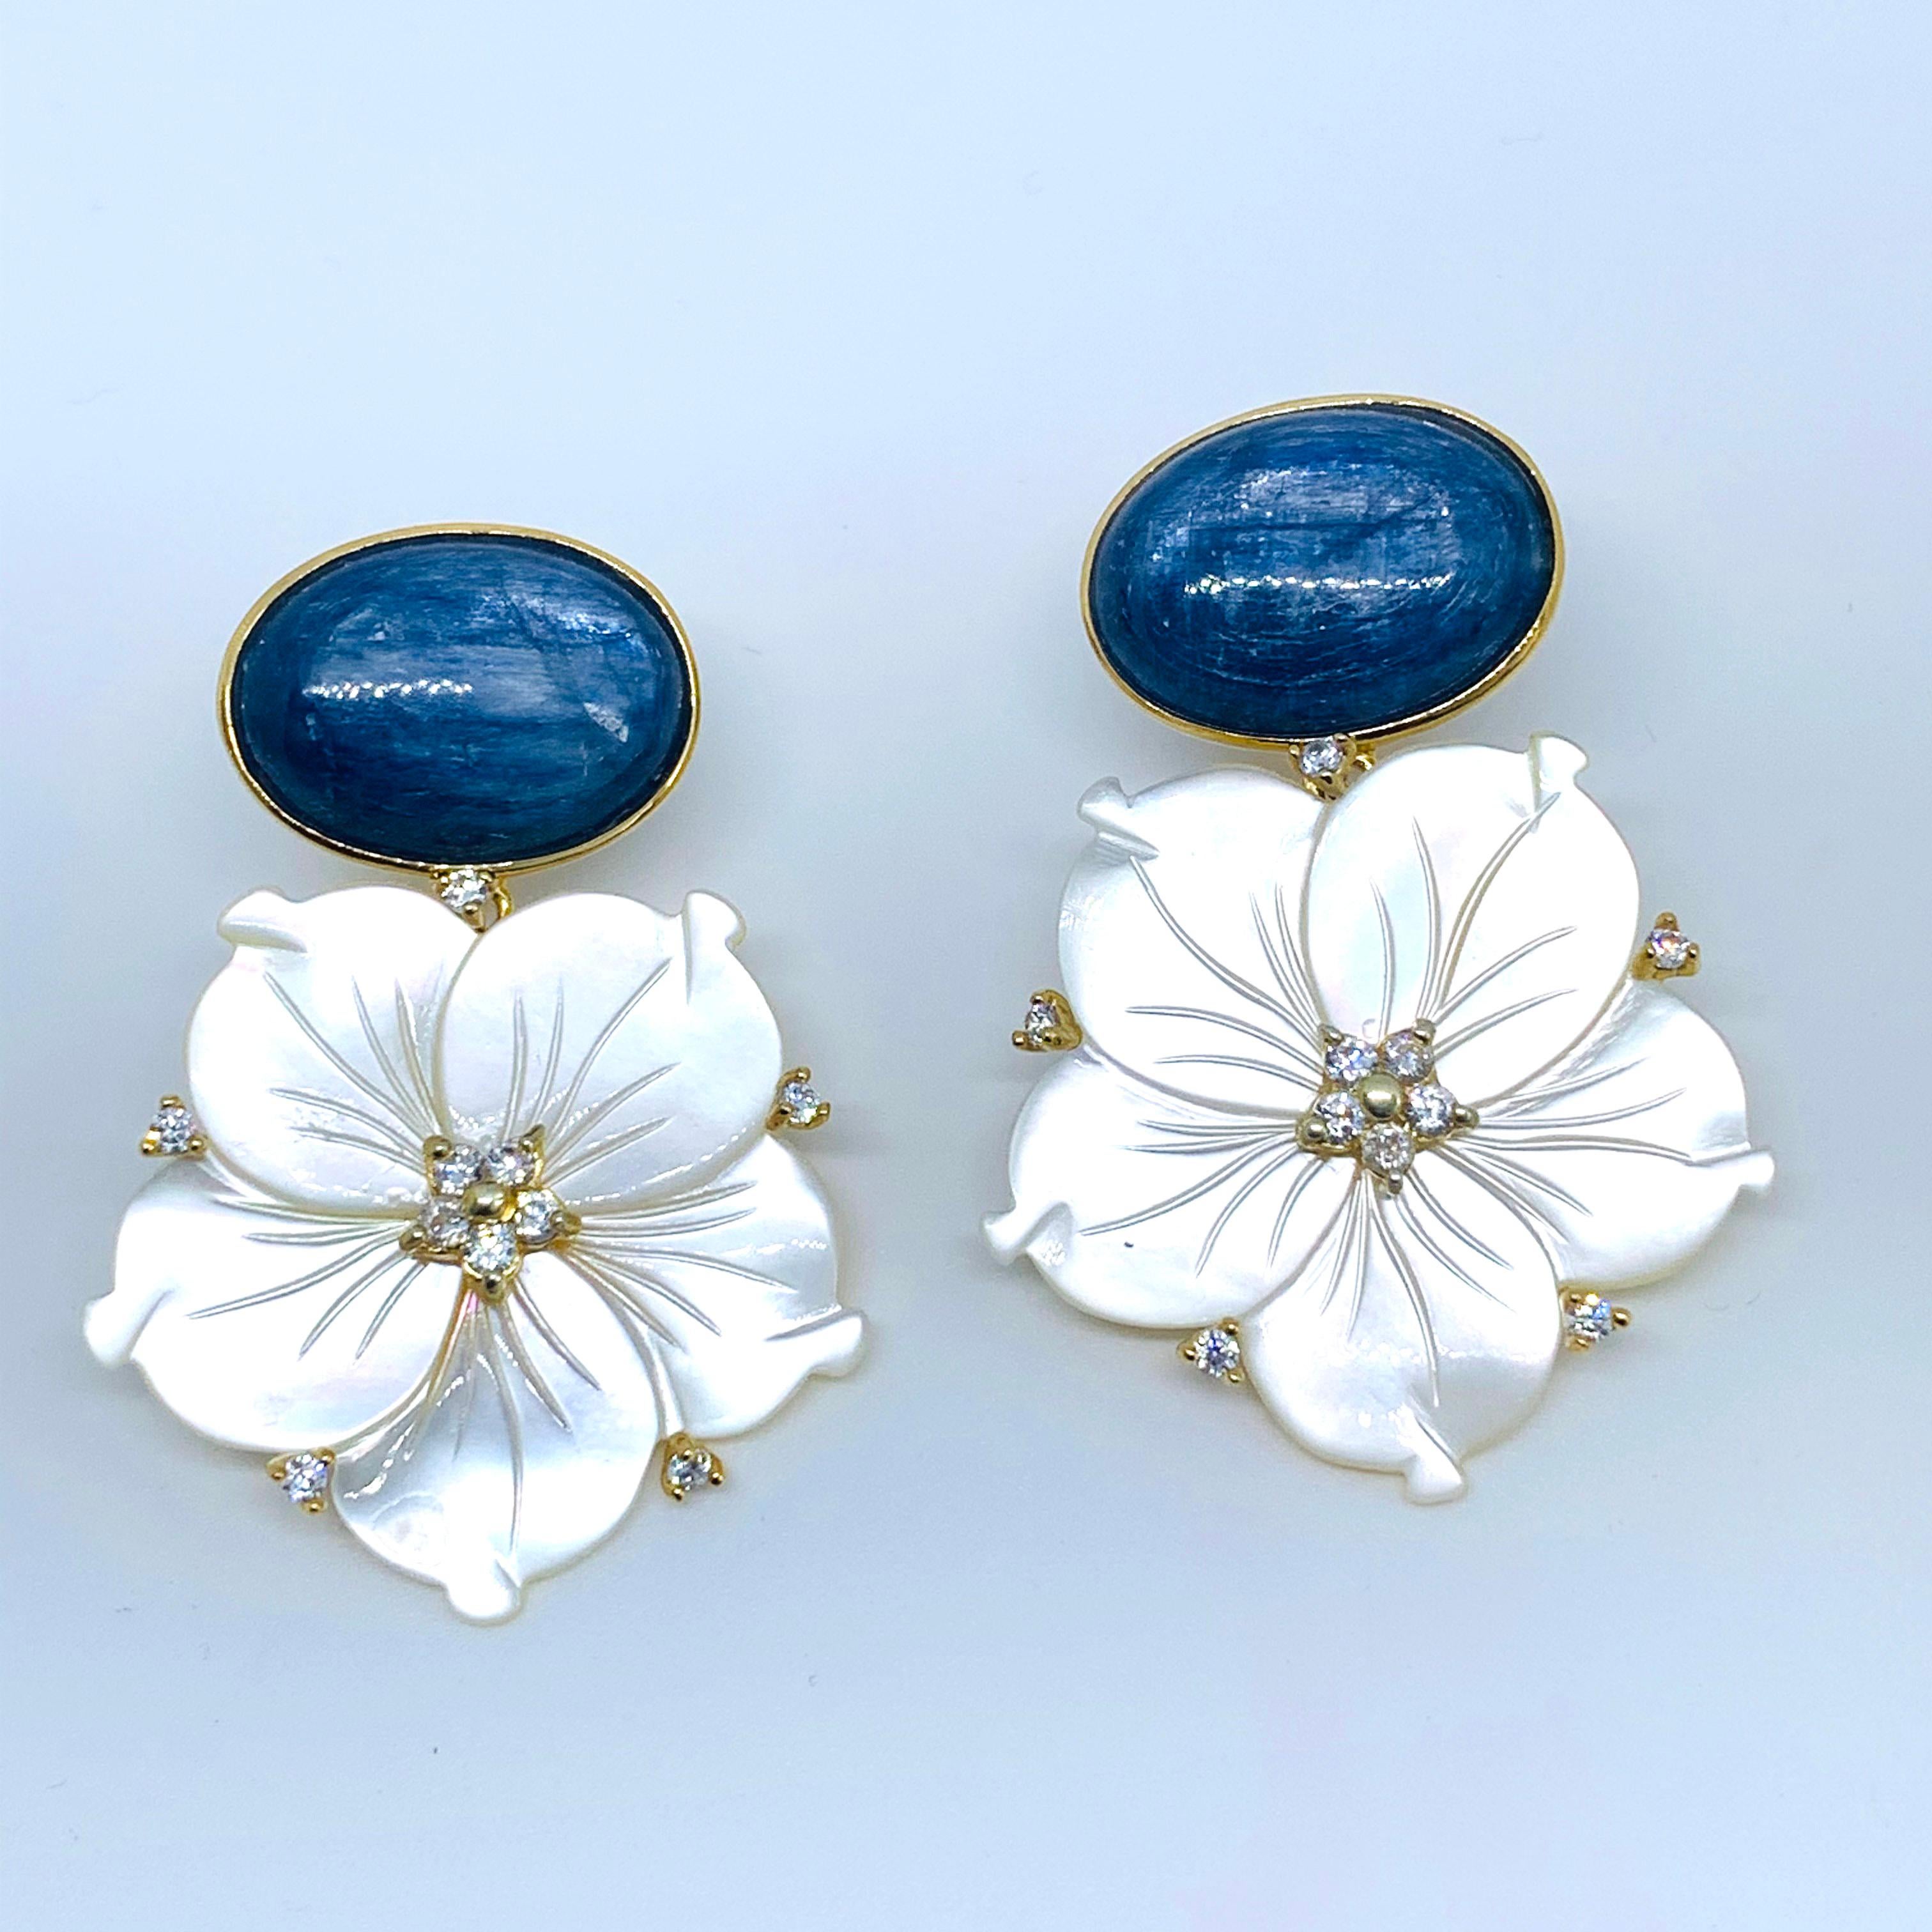 Stunning Oval Kyanite and Carved Mother of Pearl Flower Drop Vermeil Earrings

This gorgeous pair of earrings features genuine oval cabochon-cut blue kyanite and beautifully carved mother of pearl flower, adorned with round simulated diamond,